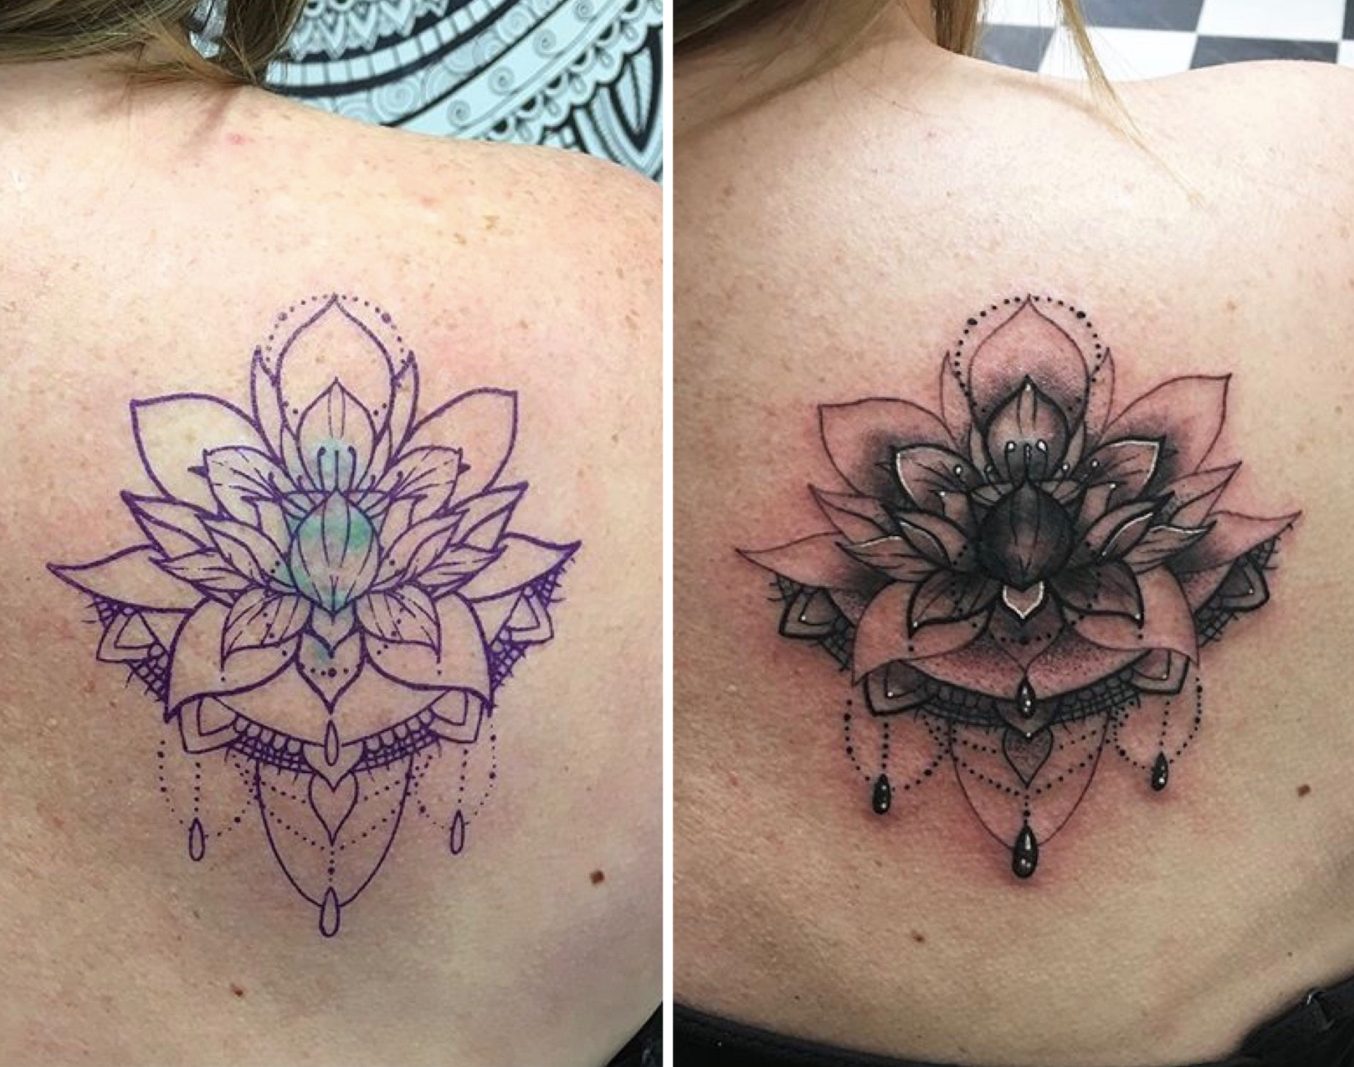 Lotus Tattoo And Lotus Tattoo Meanings Lotus Flower Tattoo Ideas And  Designs  HubPages